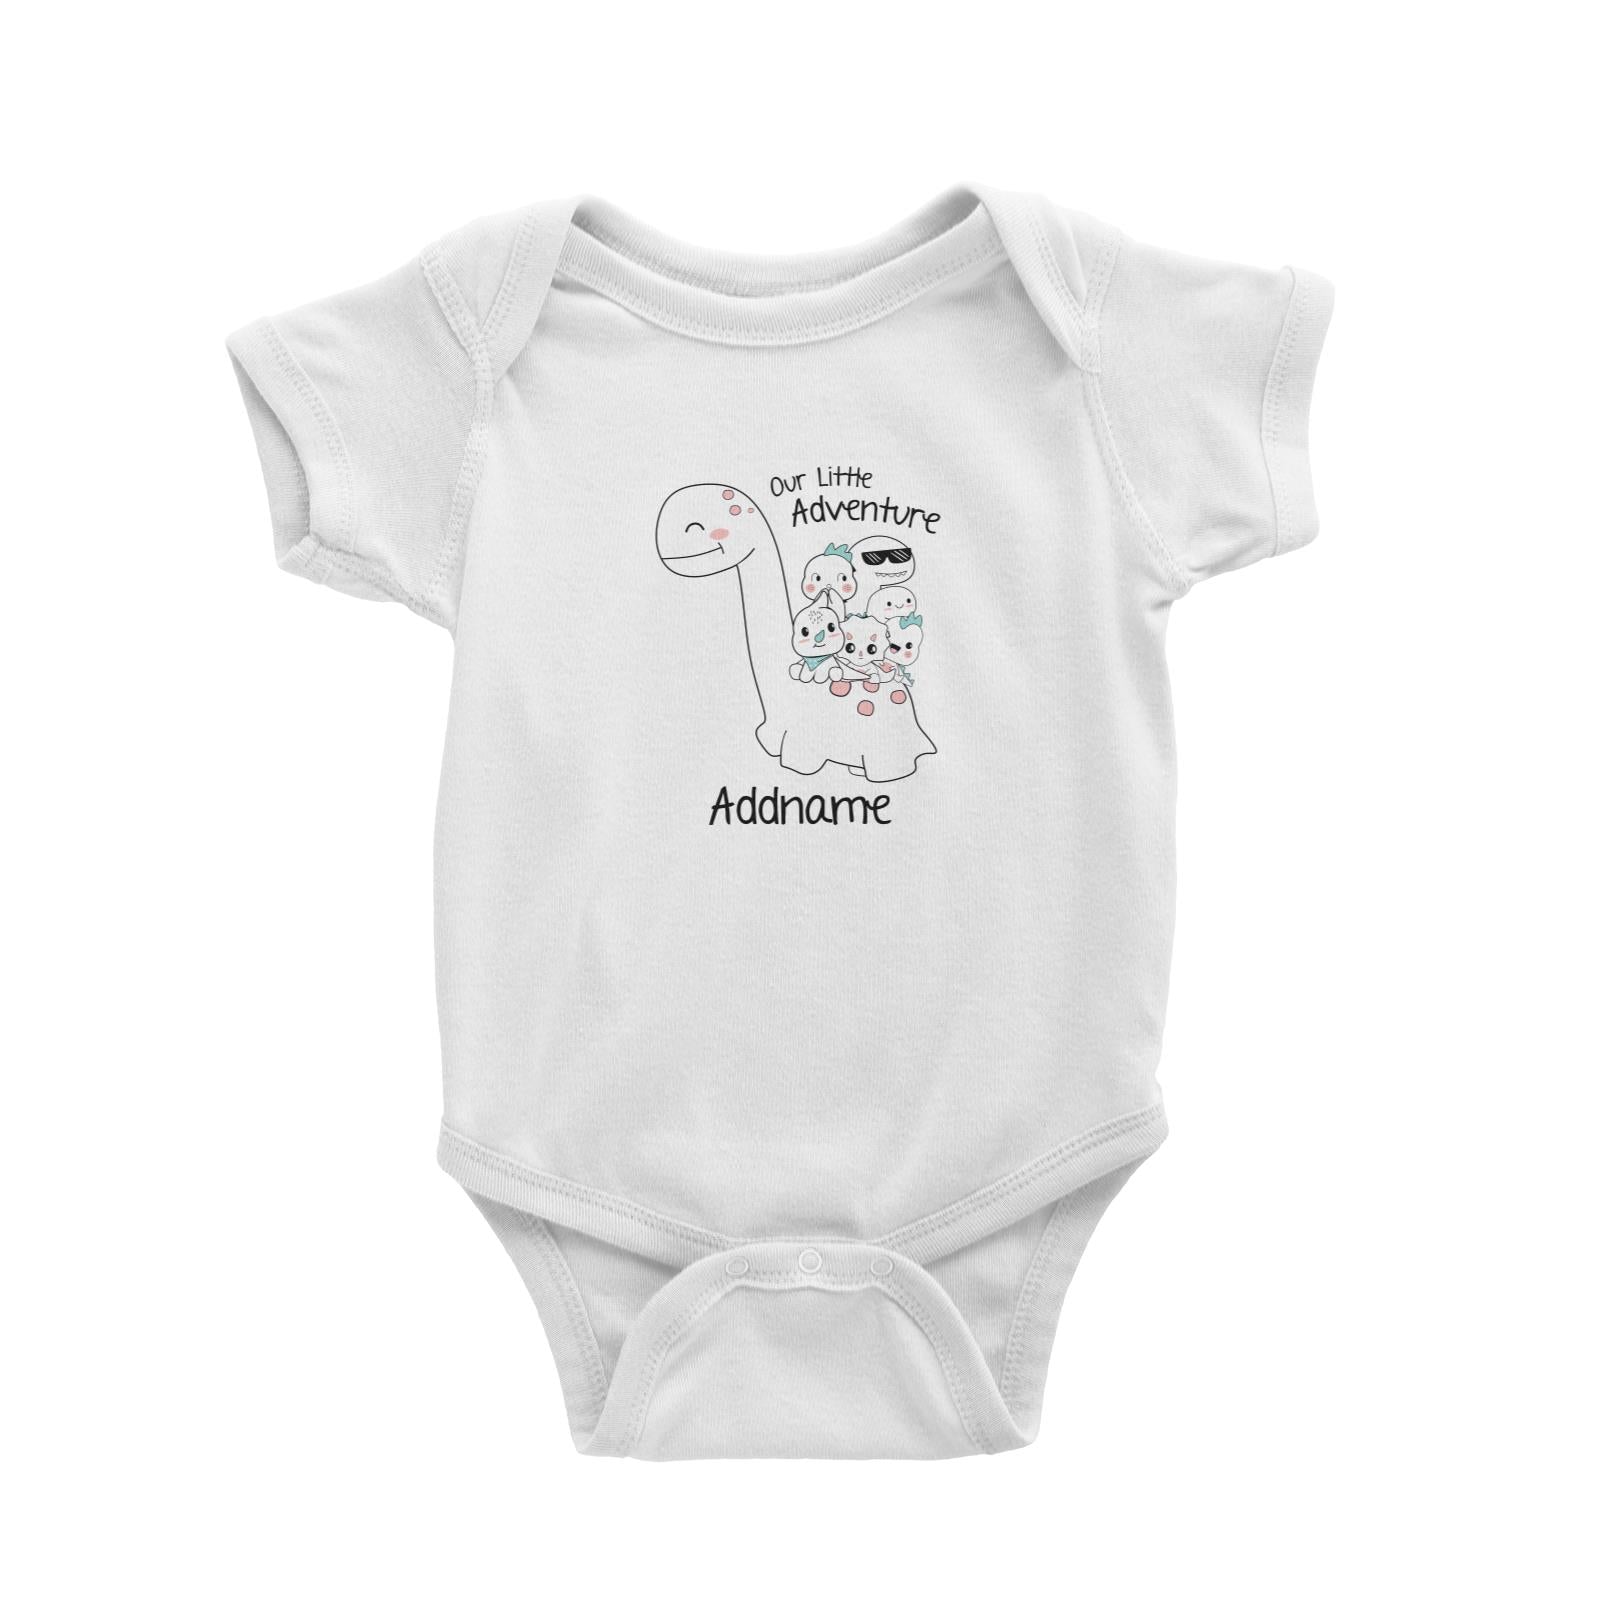 Cute Animals And Friends Series Cute Little Dinosaur Our Little Adventure Addname Baby Romper